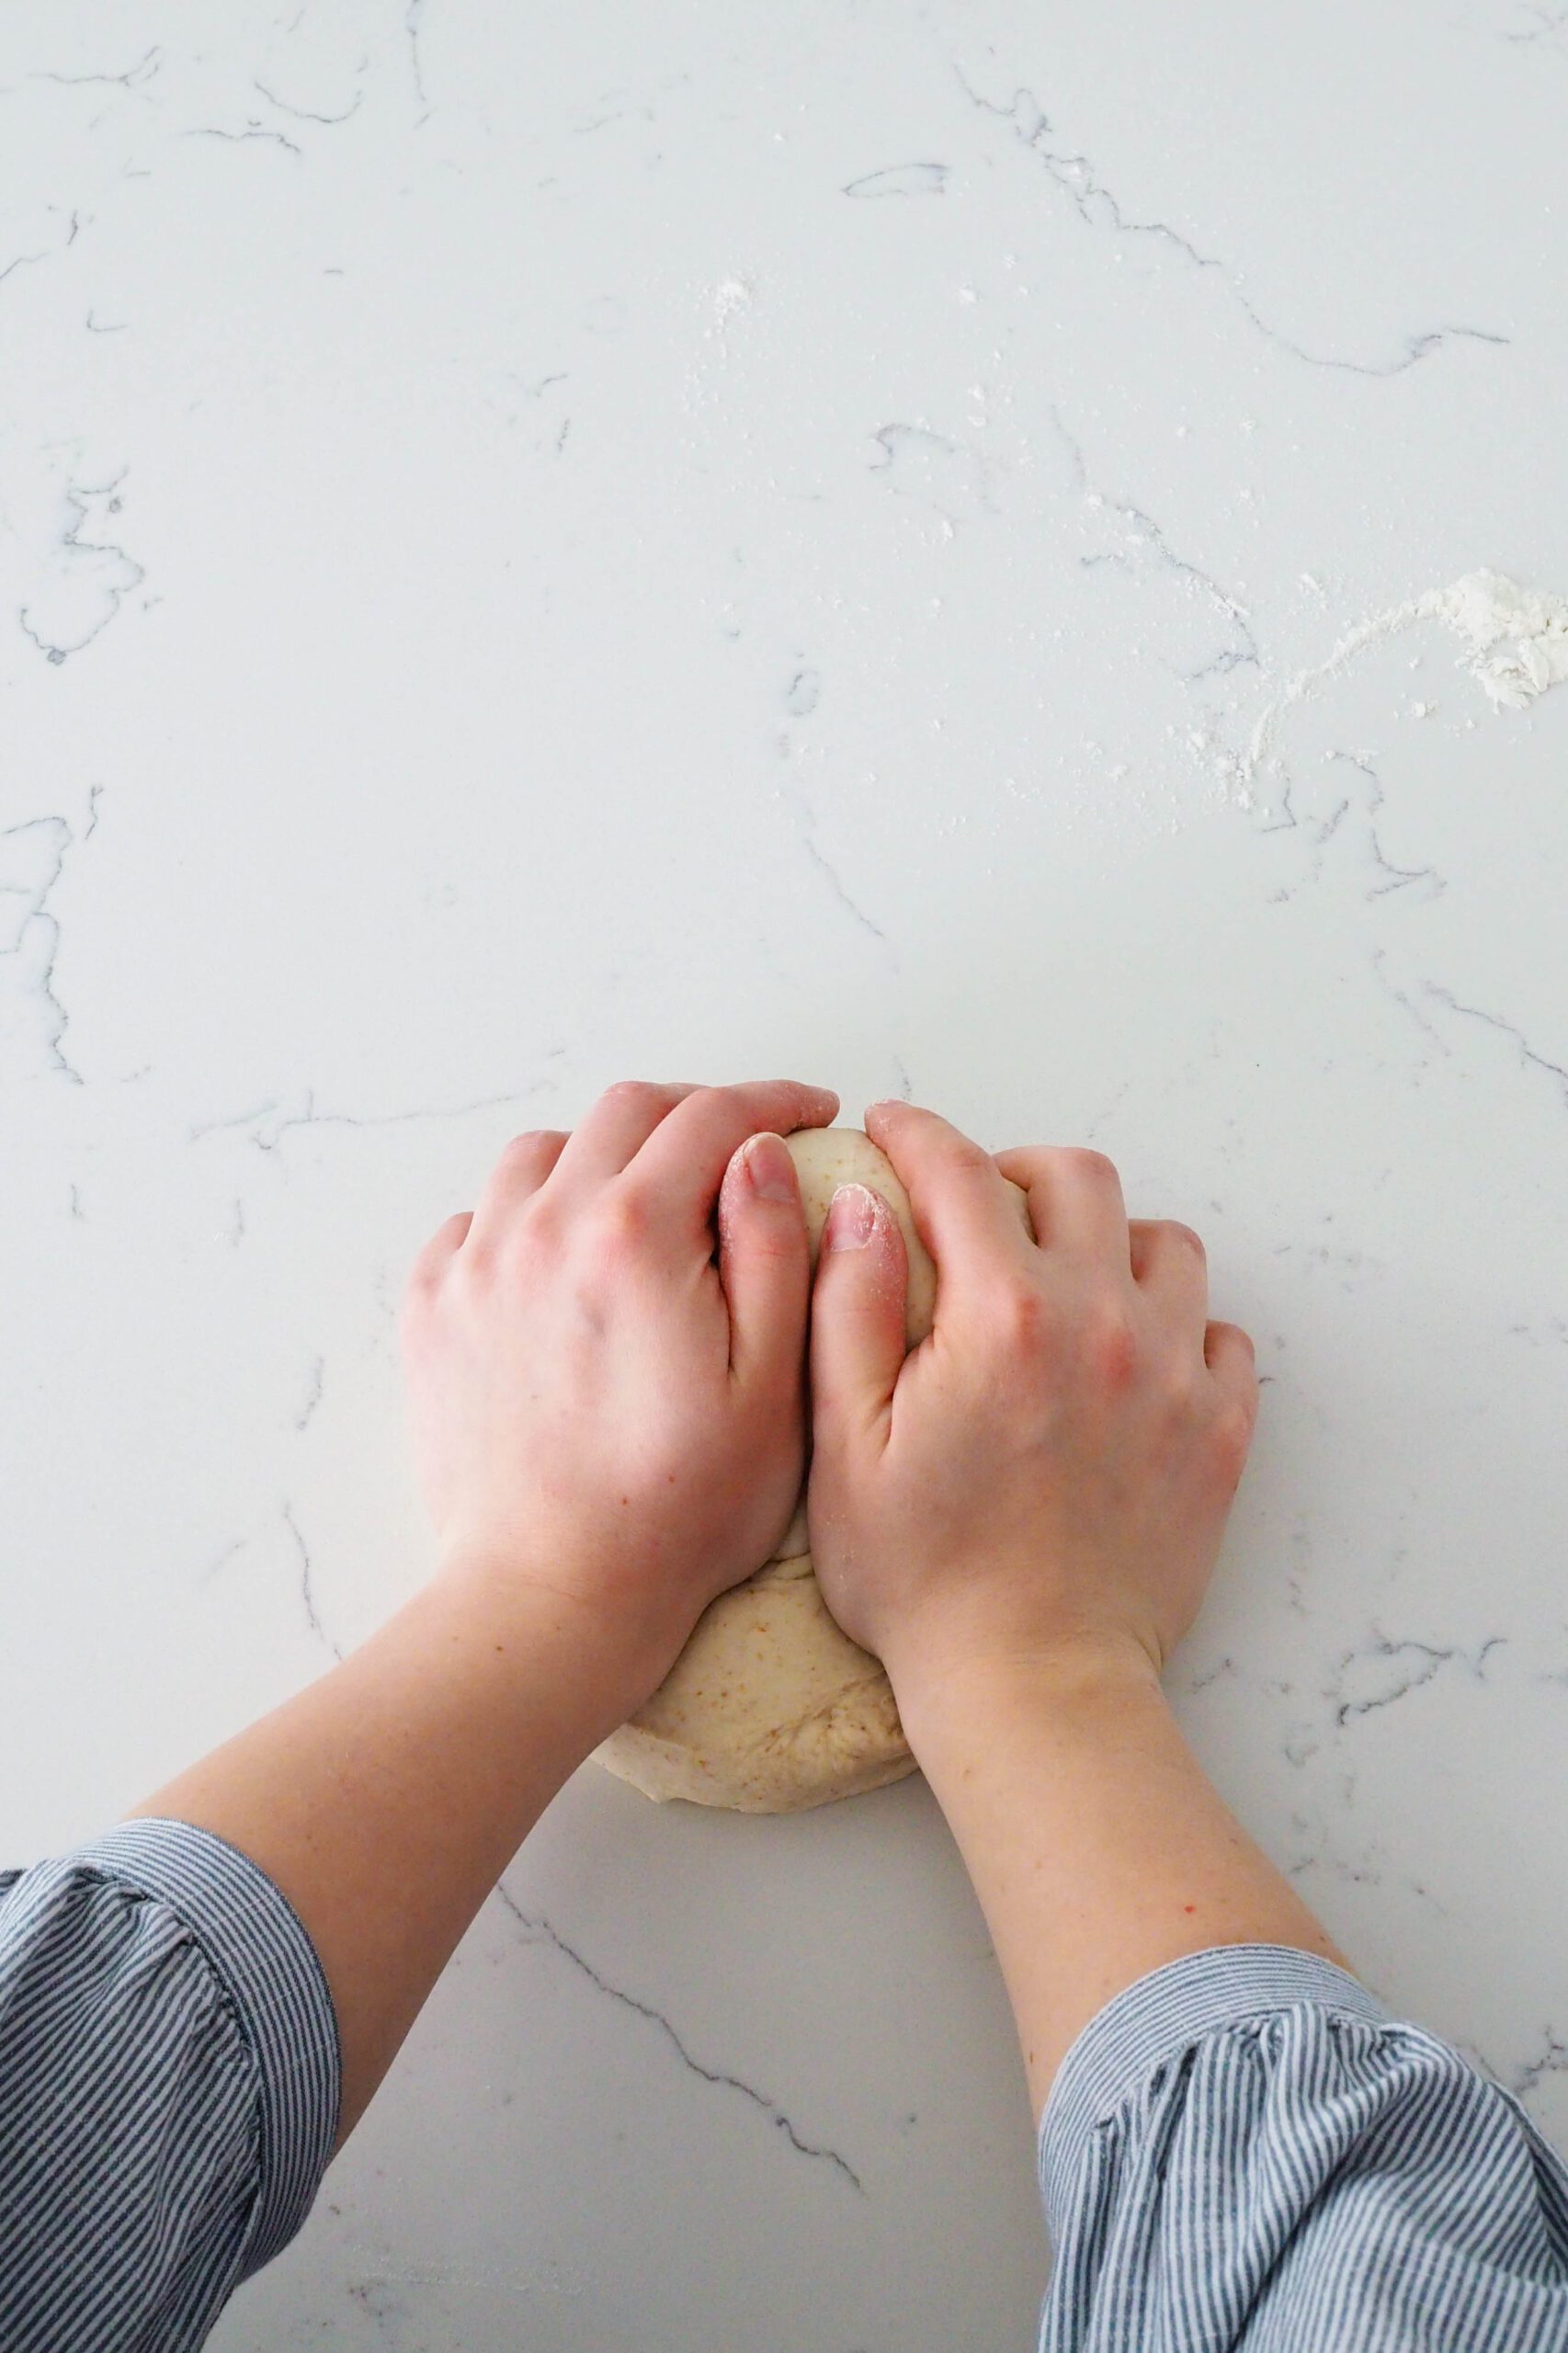 Two hands knead a ball of thin crust pizza dough.